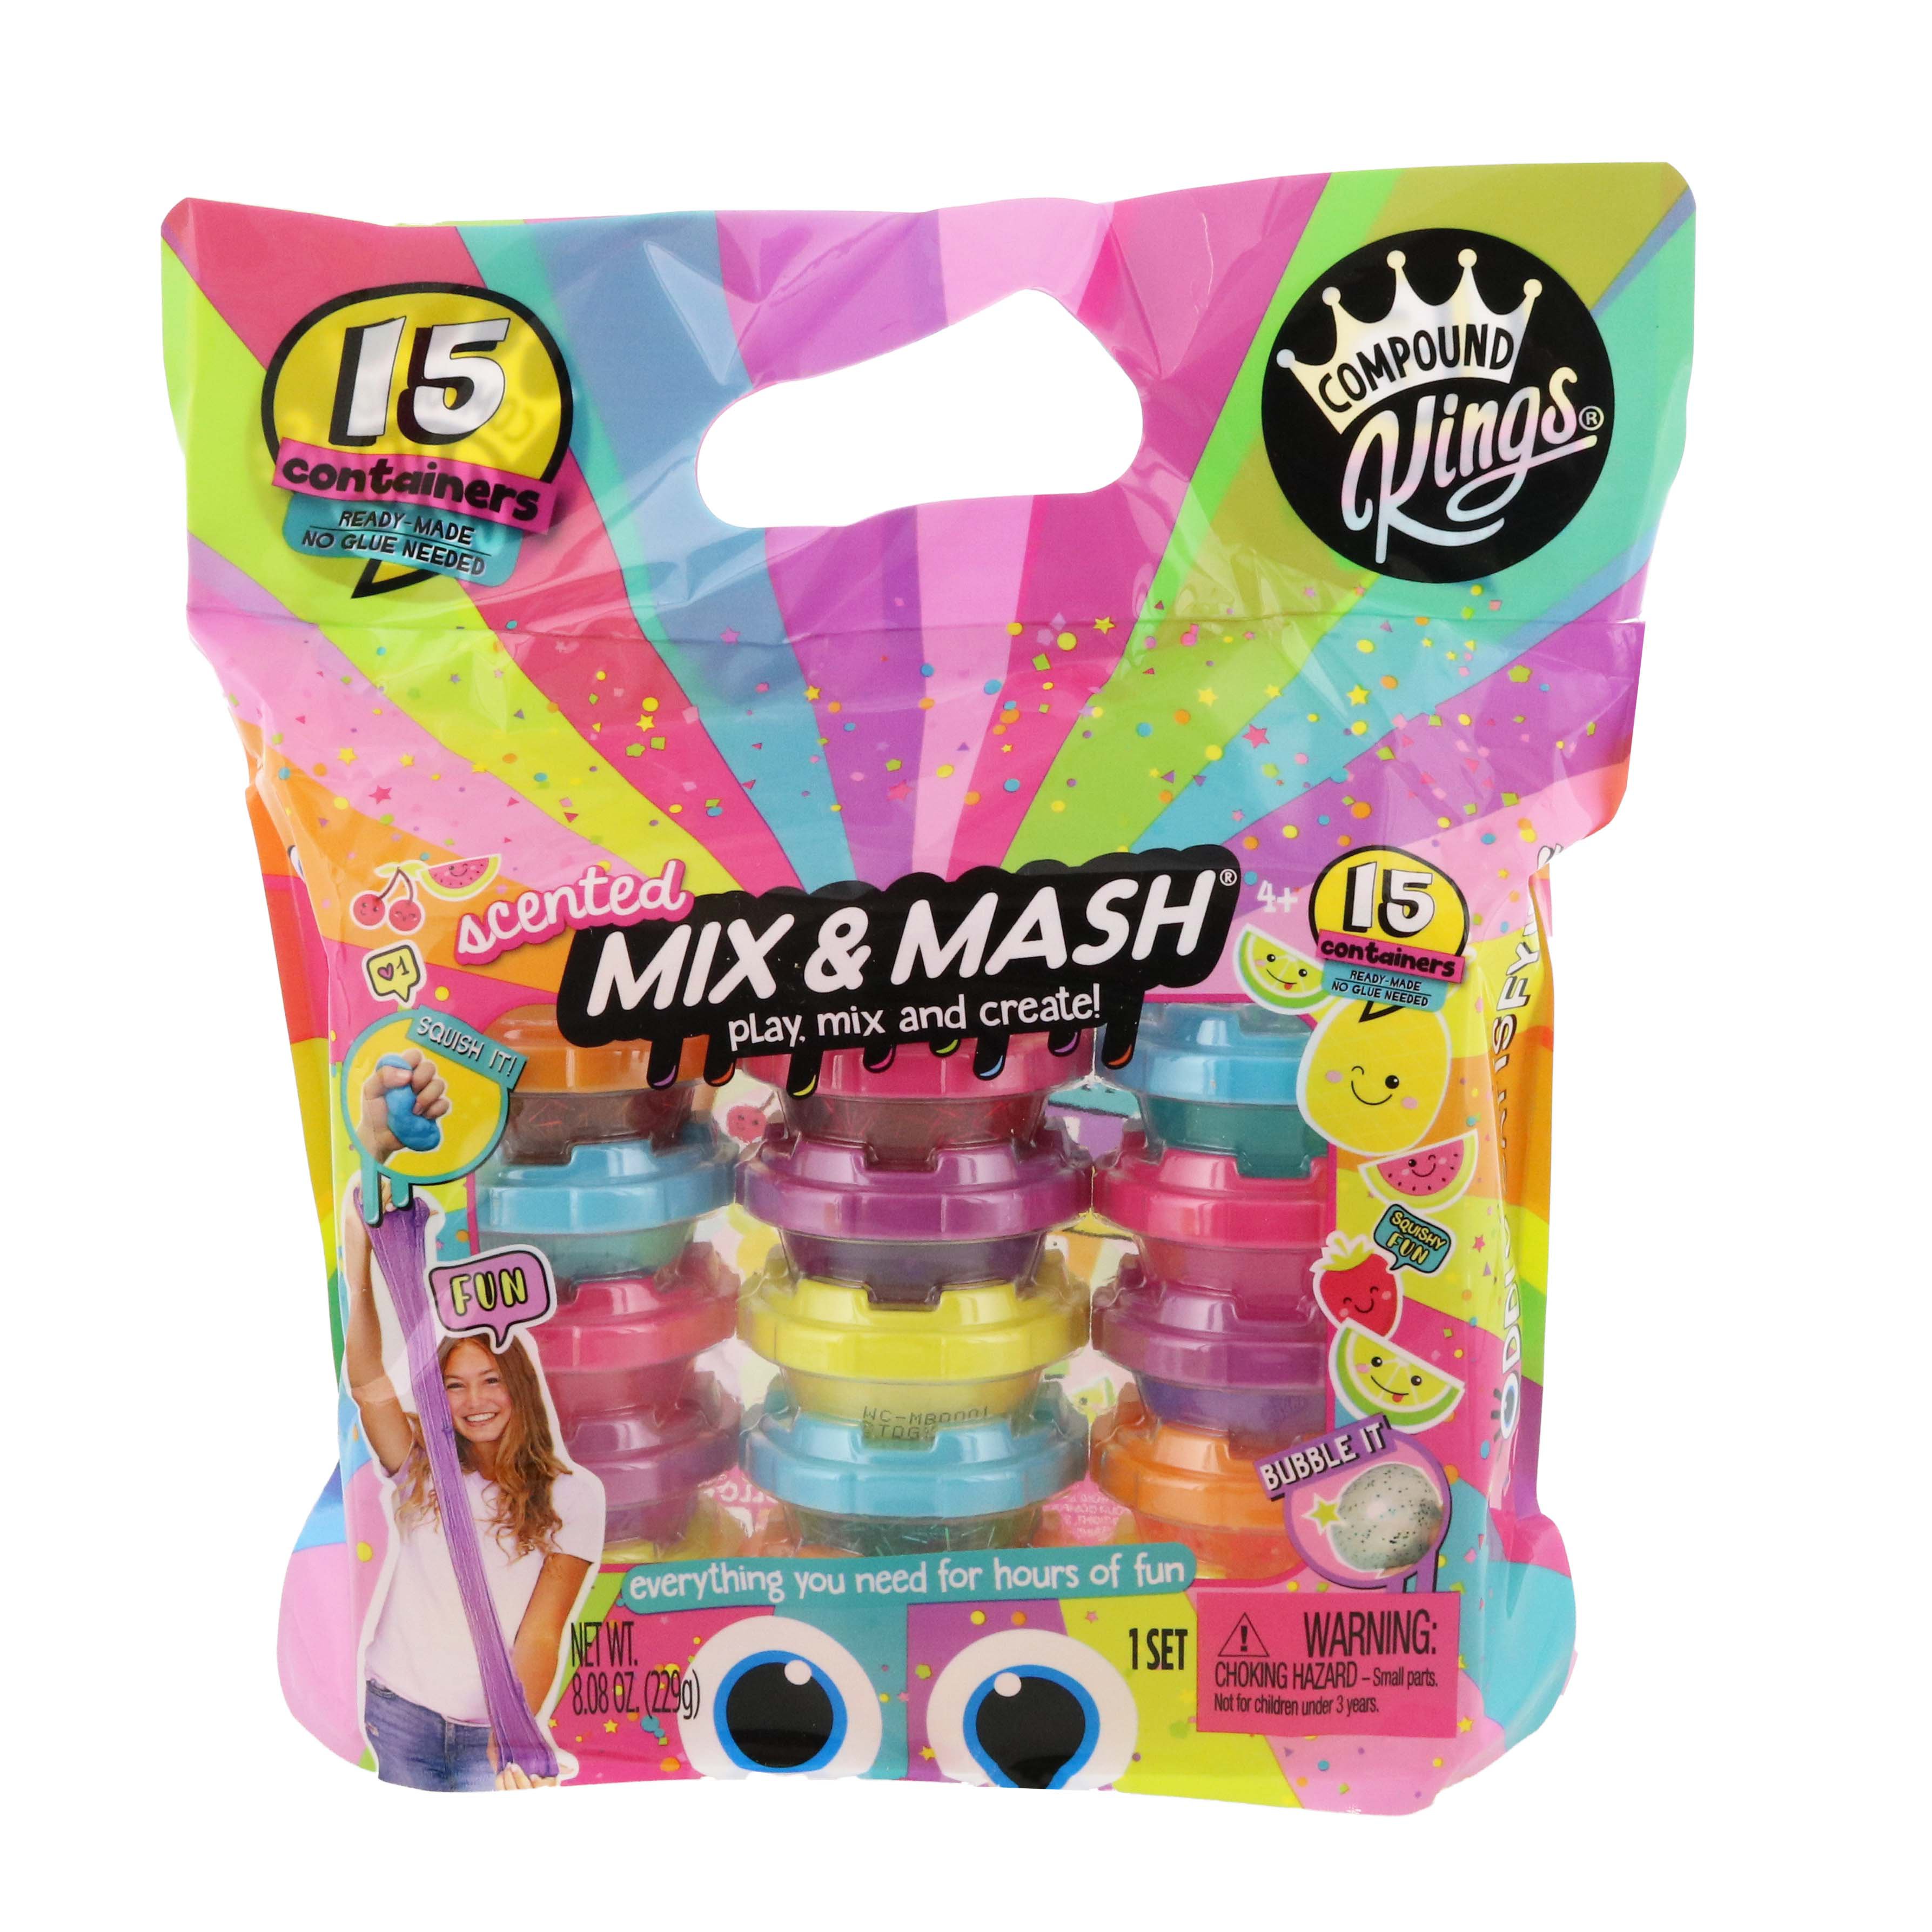 Compound Kings Mix & Mash Scented Slime Kit at H-E-B